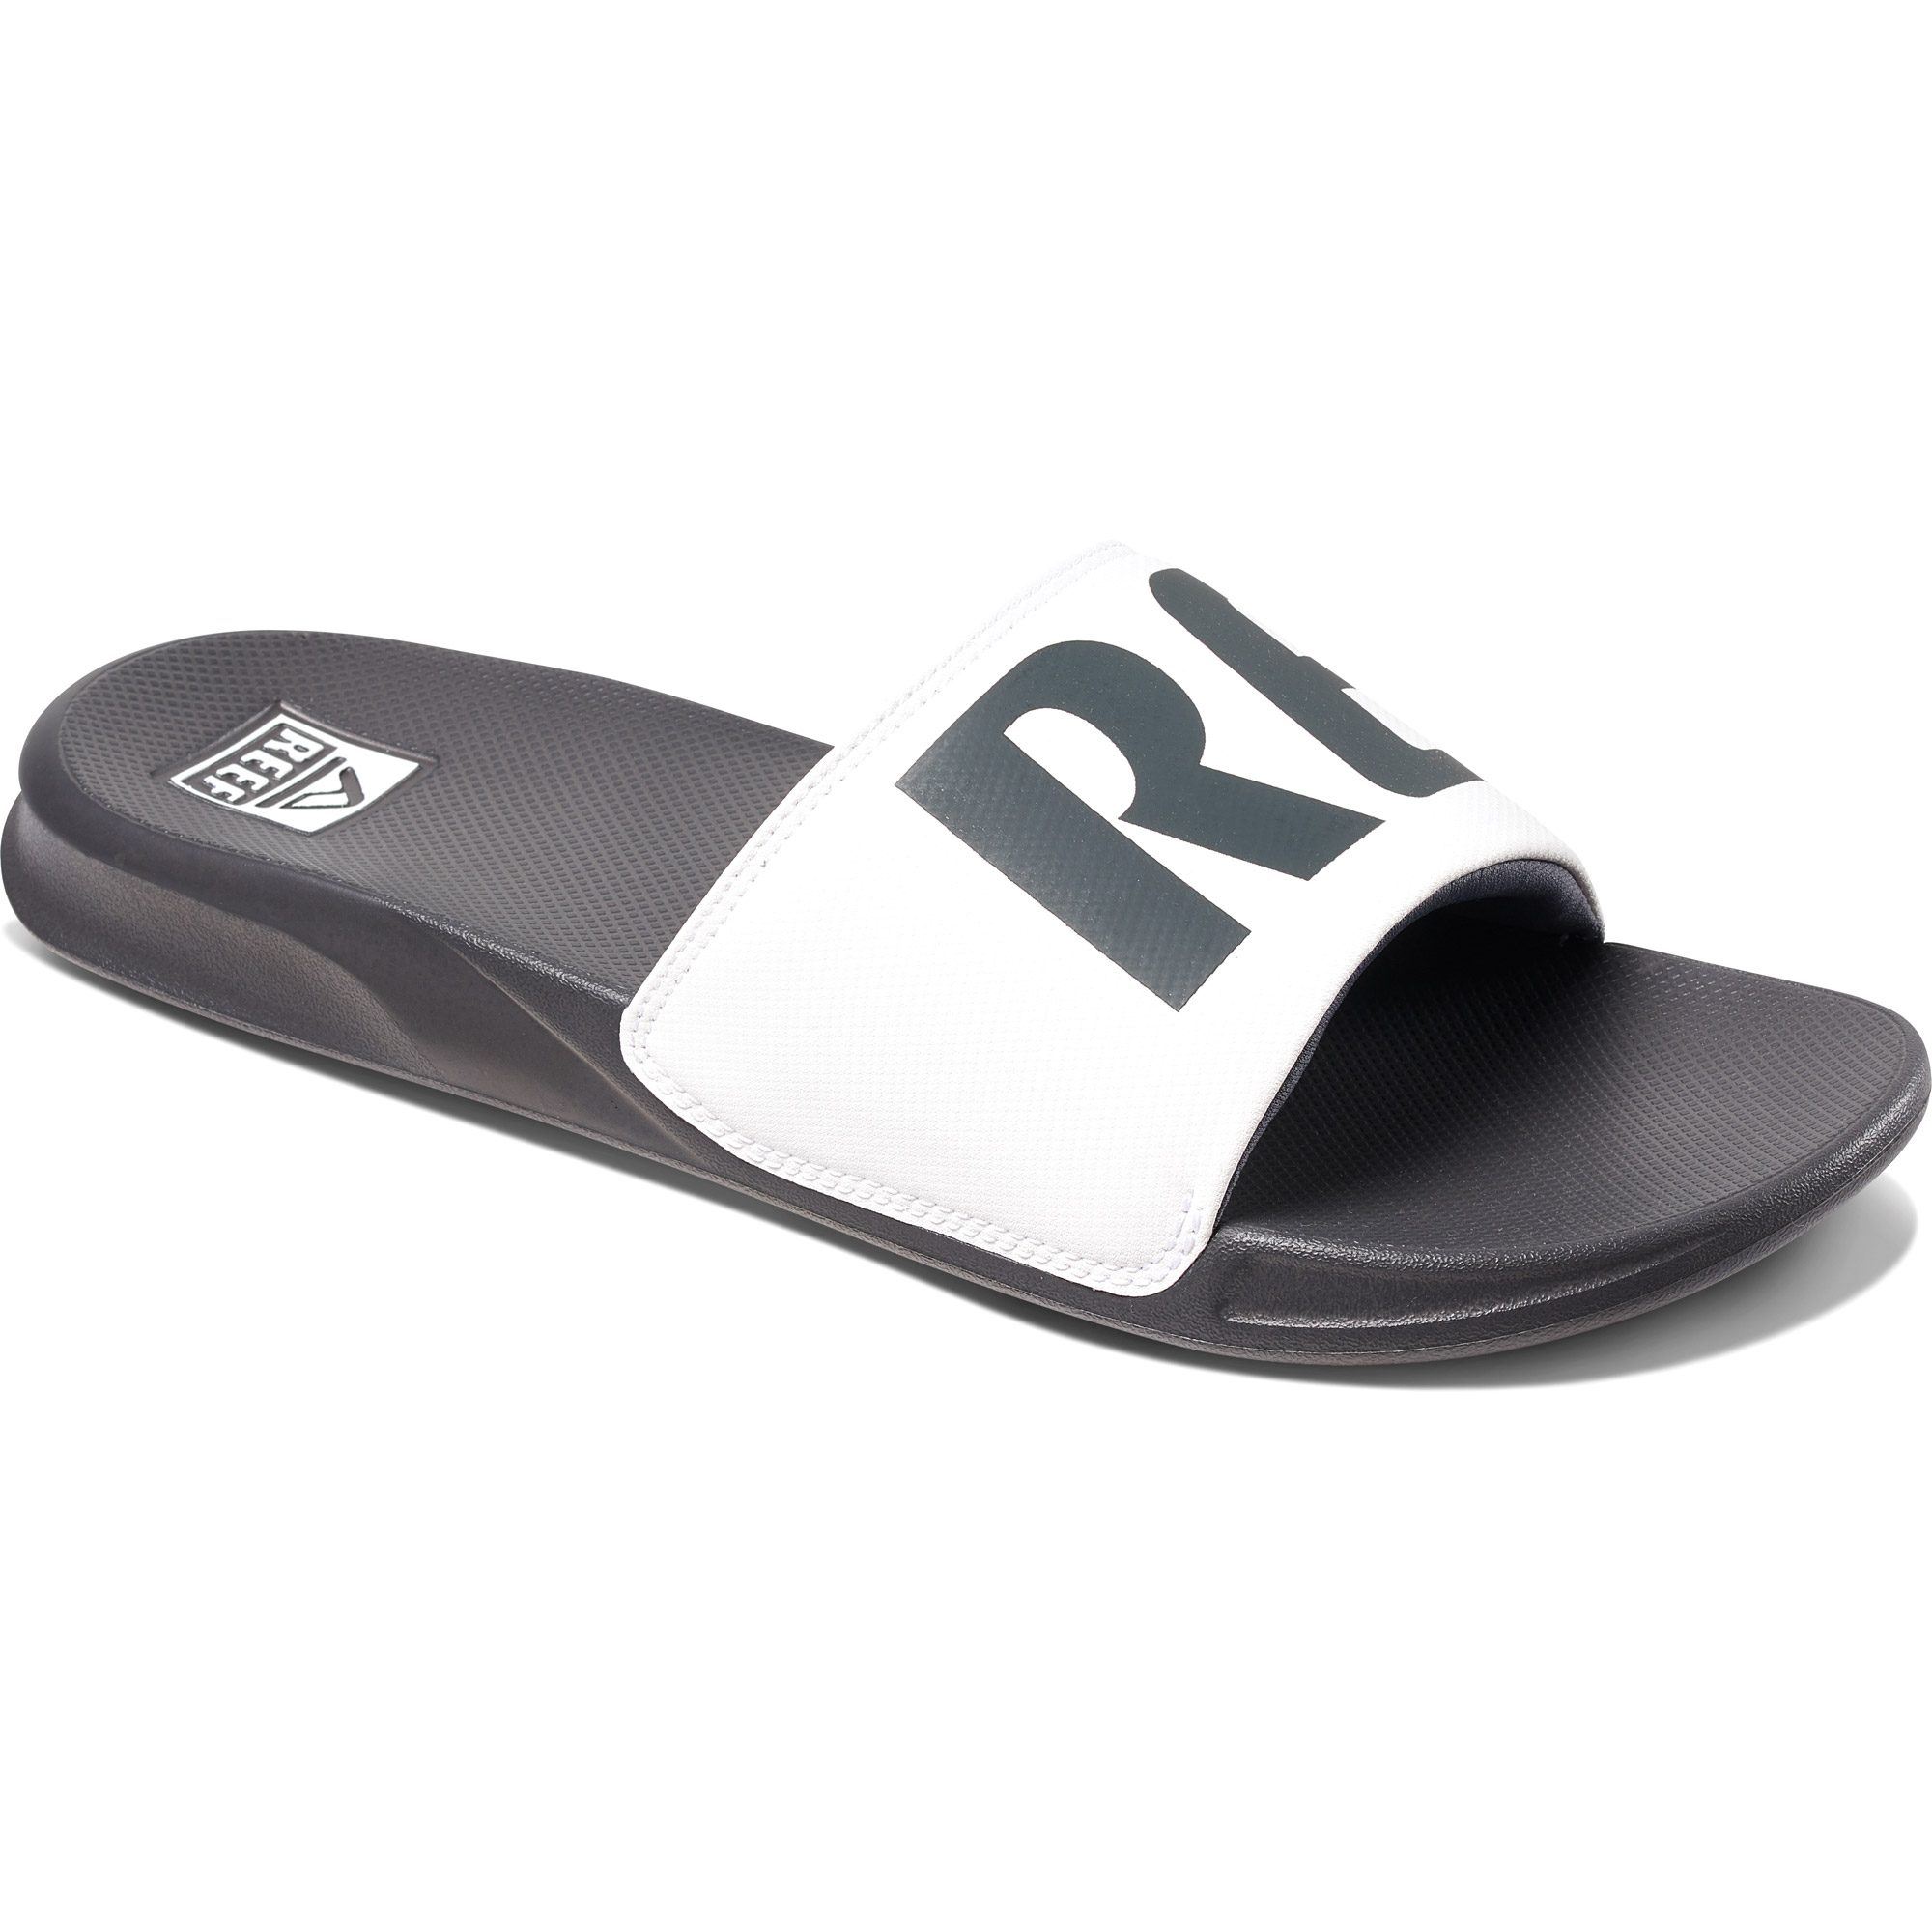 Claquettes Reef One Slide Homme